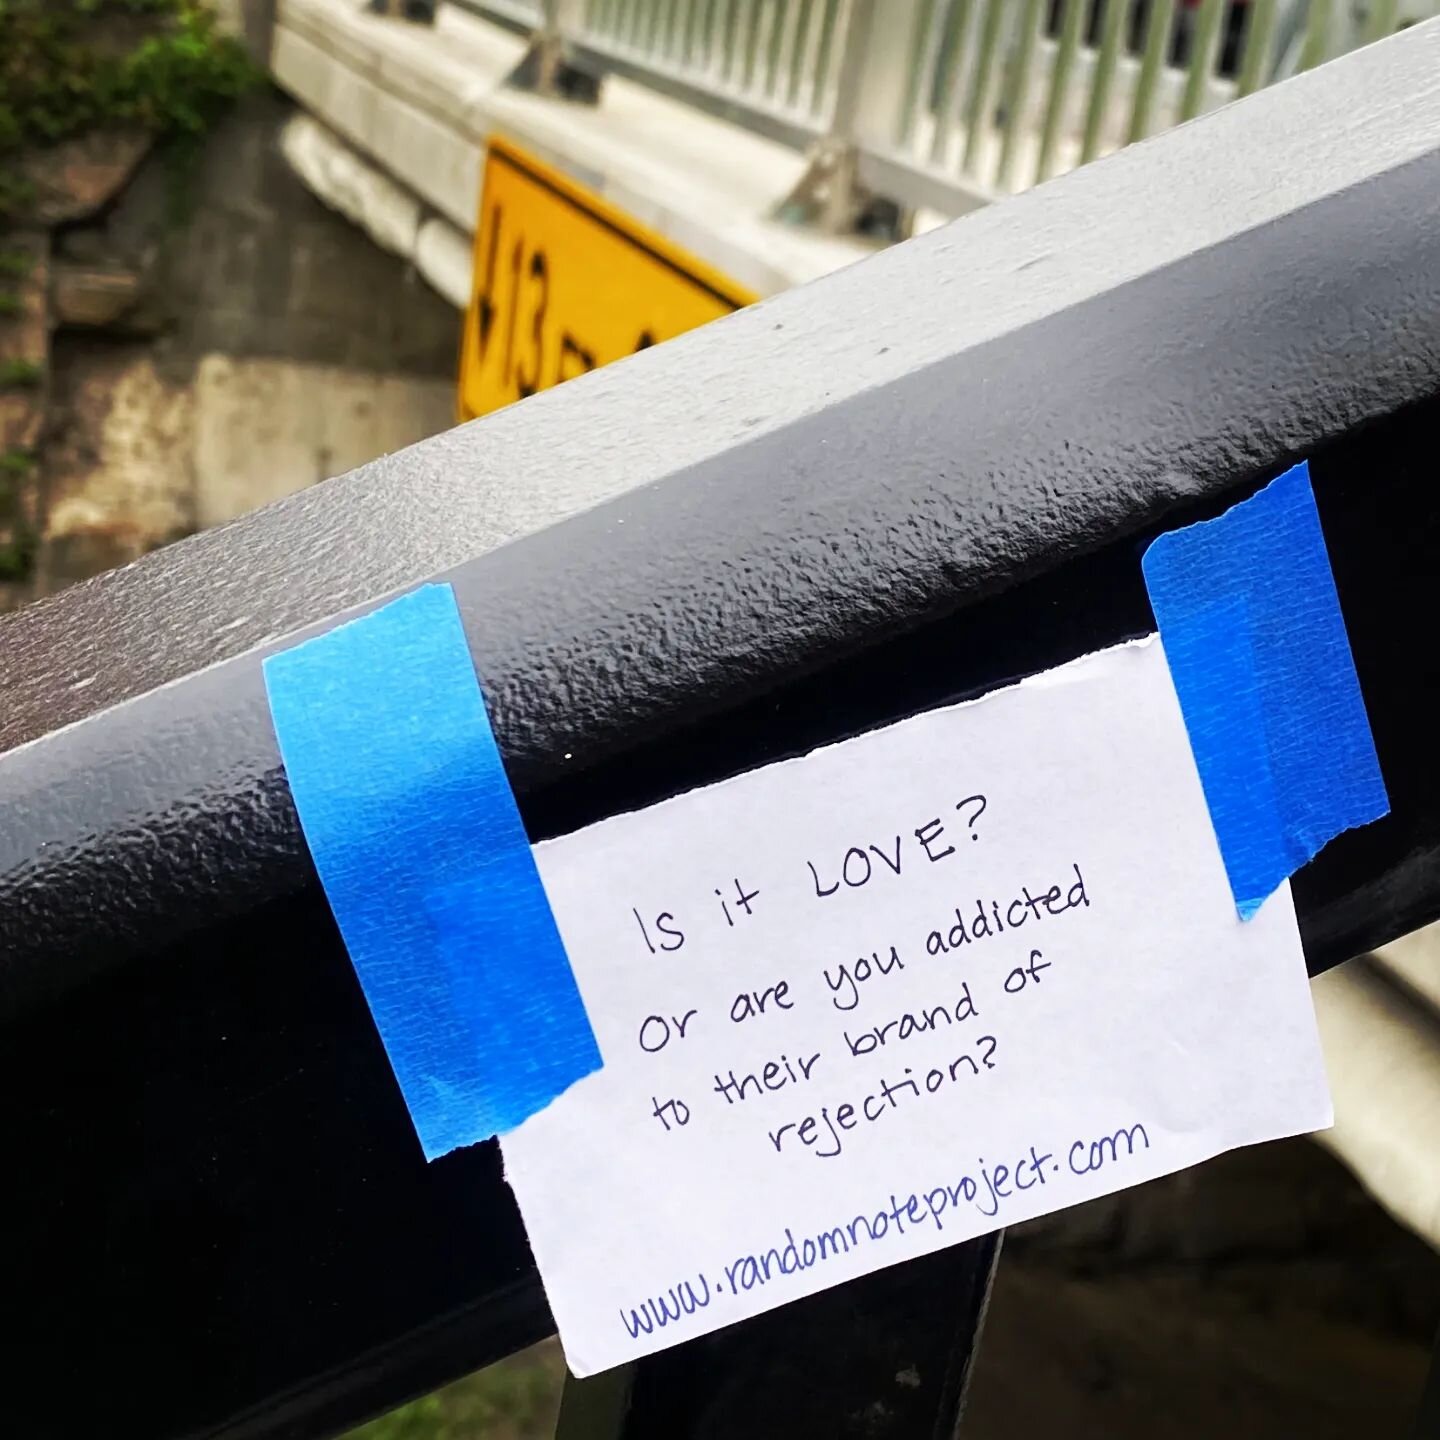 Ursula in Troy Hill, PA was walking with her boyfriend when she saw this note. &quot;It didn't really apply to me,&quot; but the note says, &quot;Is it love? Or are you addicted to their brand of rejection?&quot;
.
.
.
.
.
.
#RandomNoteProject #Rando